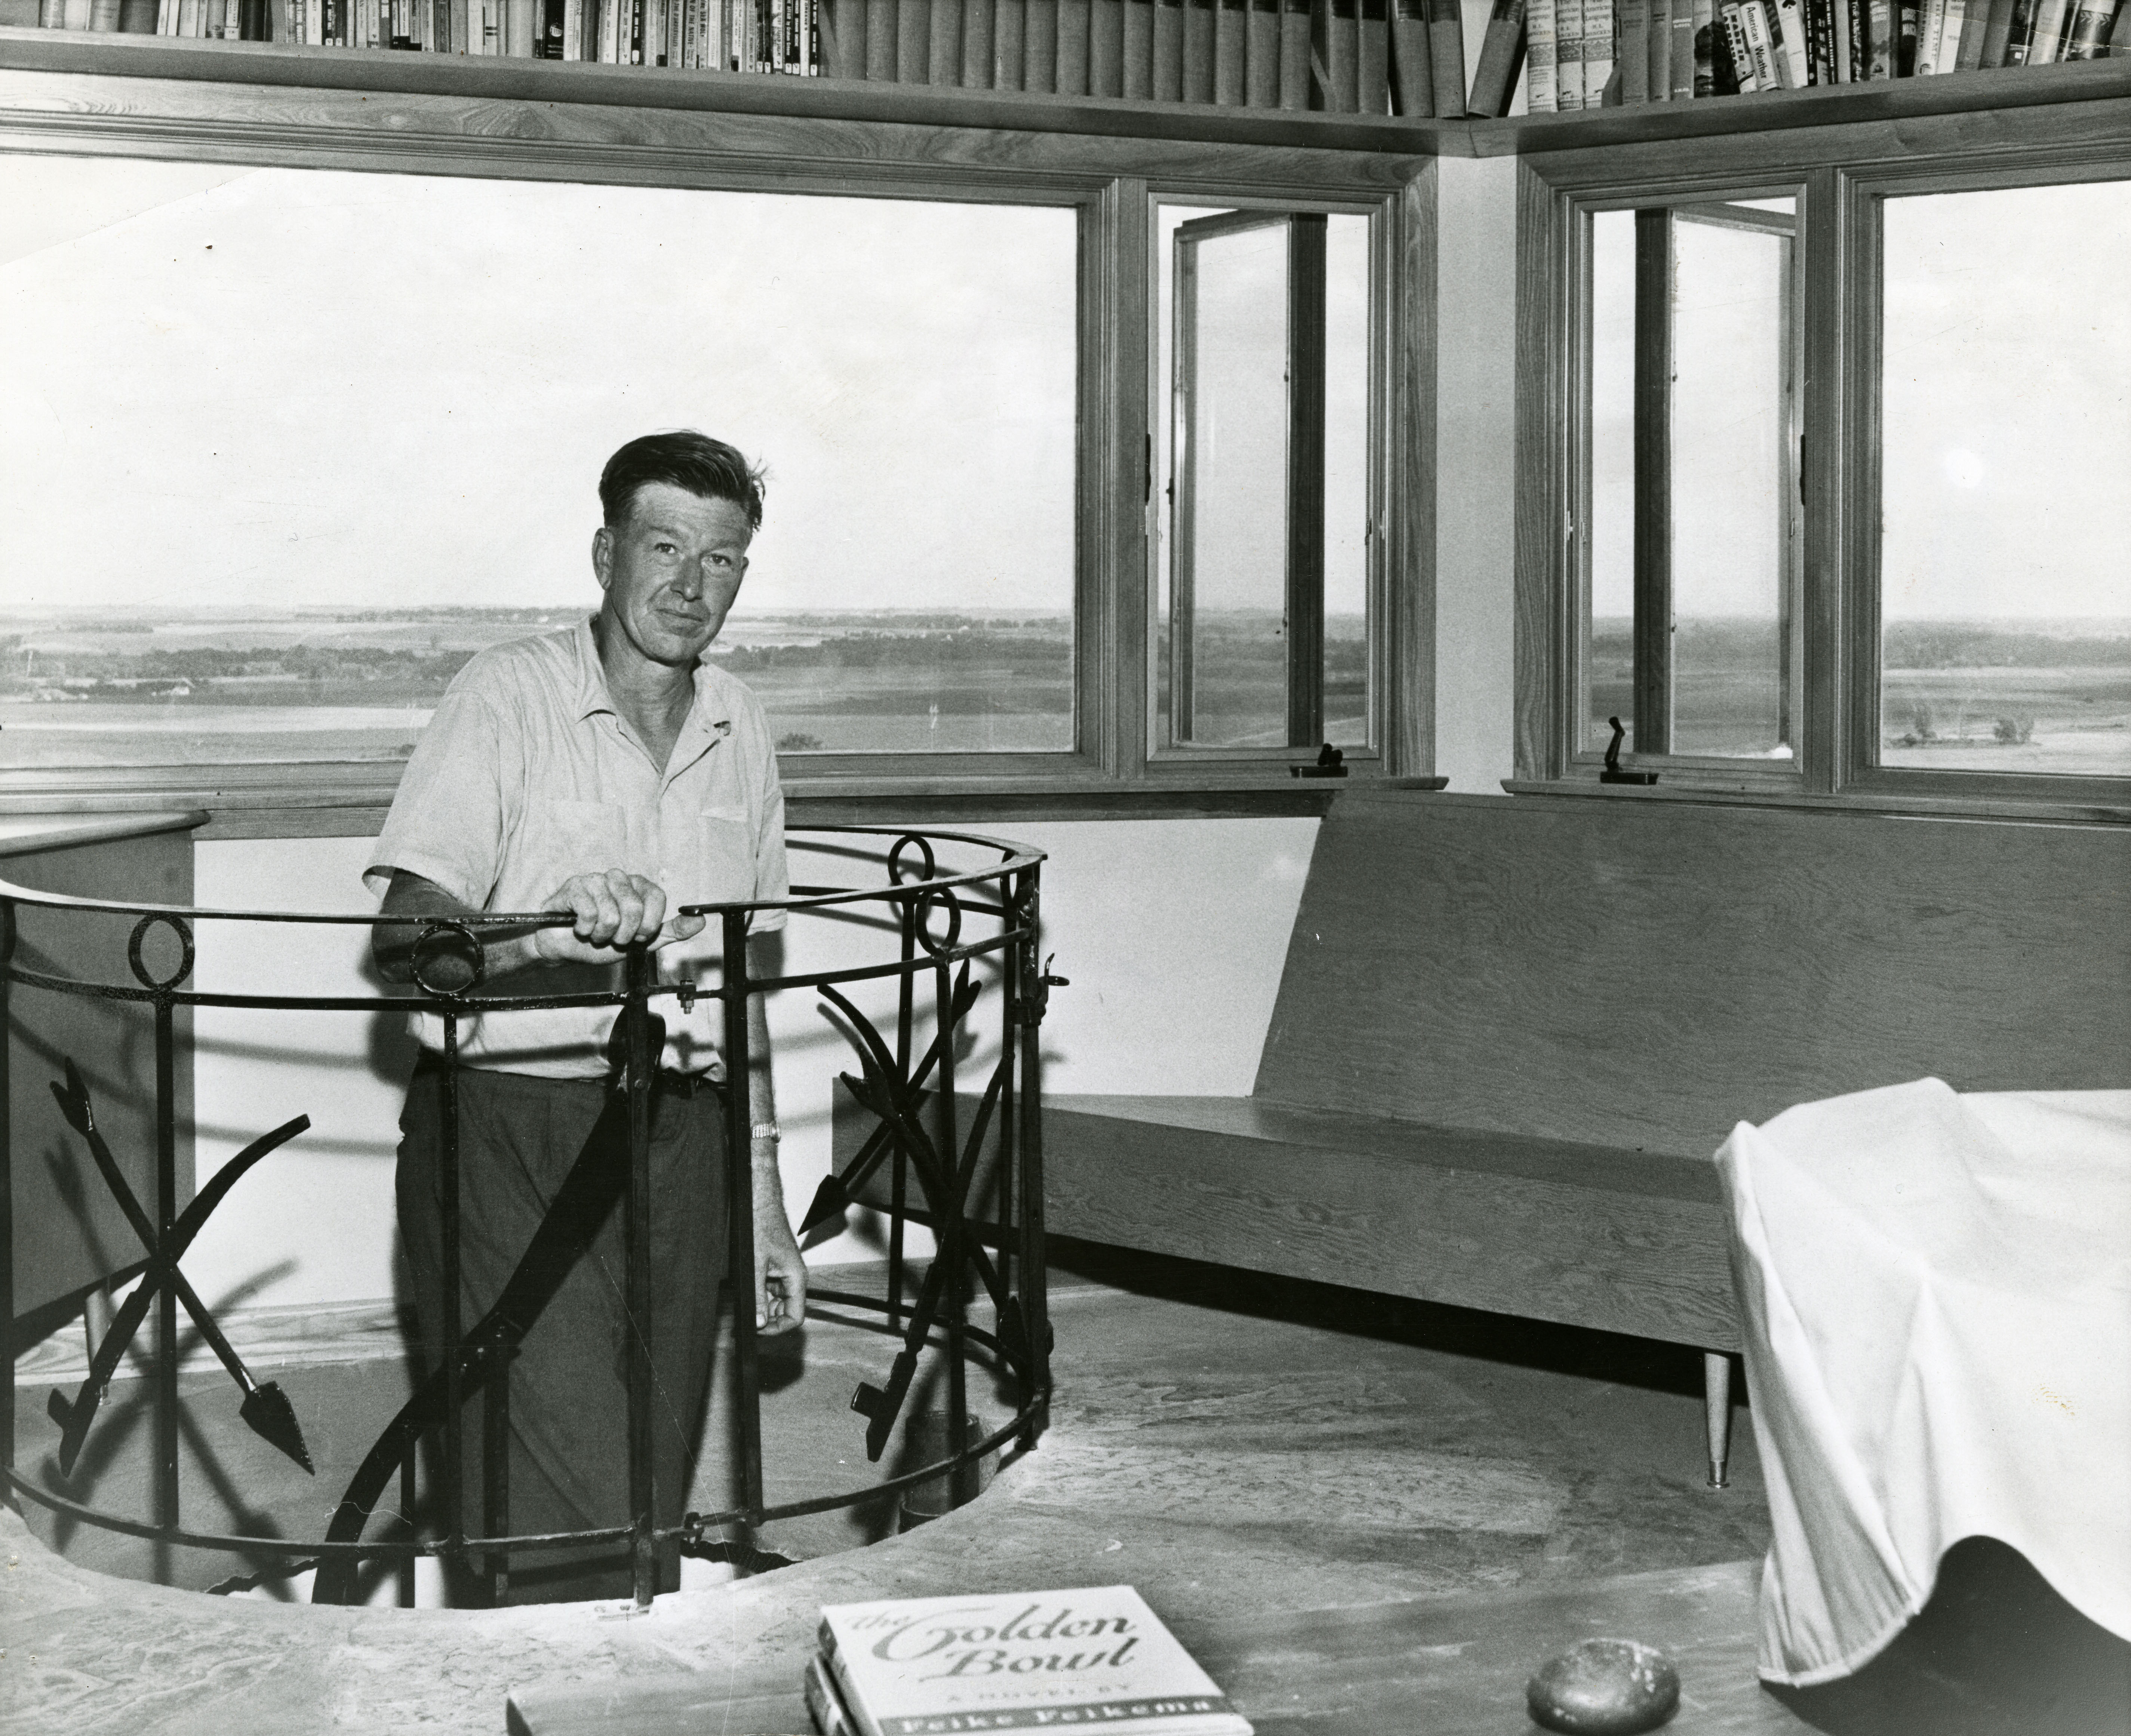 Manfred in his writing studio on top of the house. His first book, The Golden Bowl, appears in the foreground.